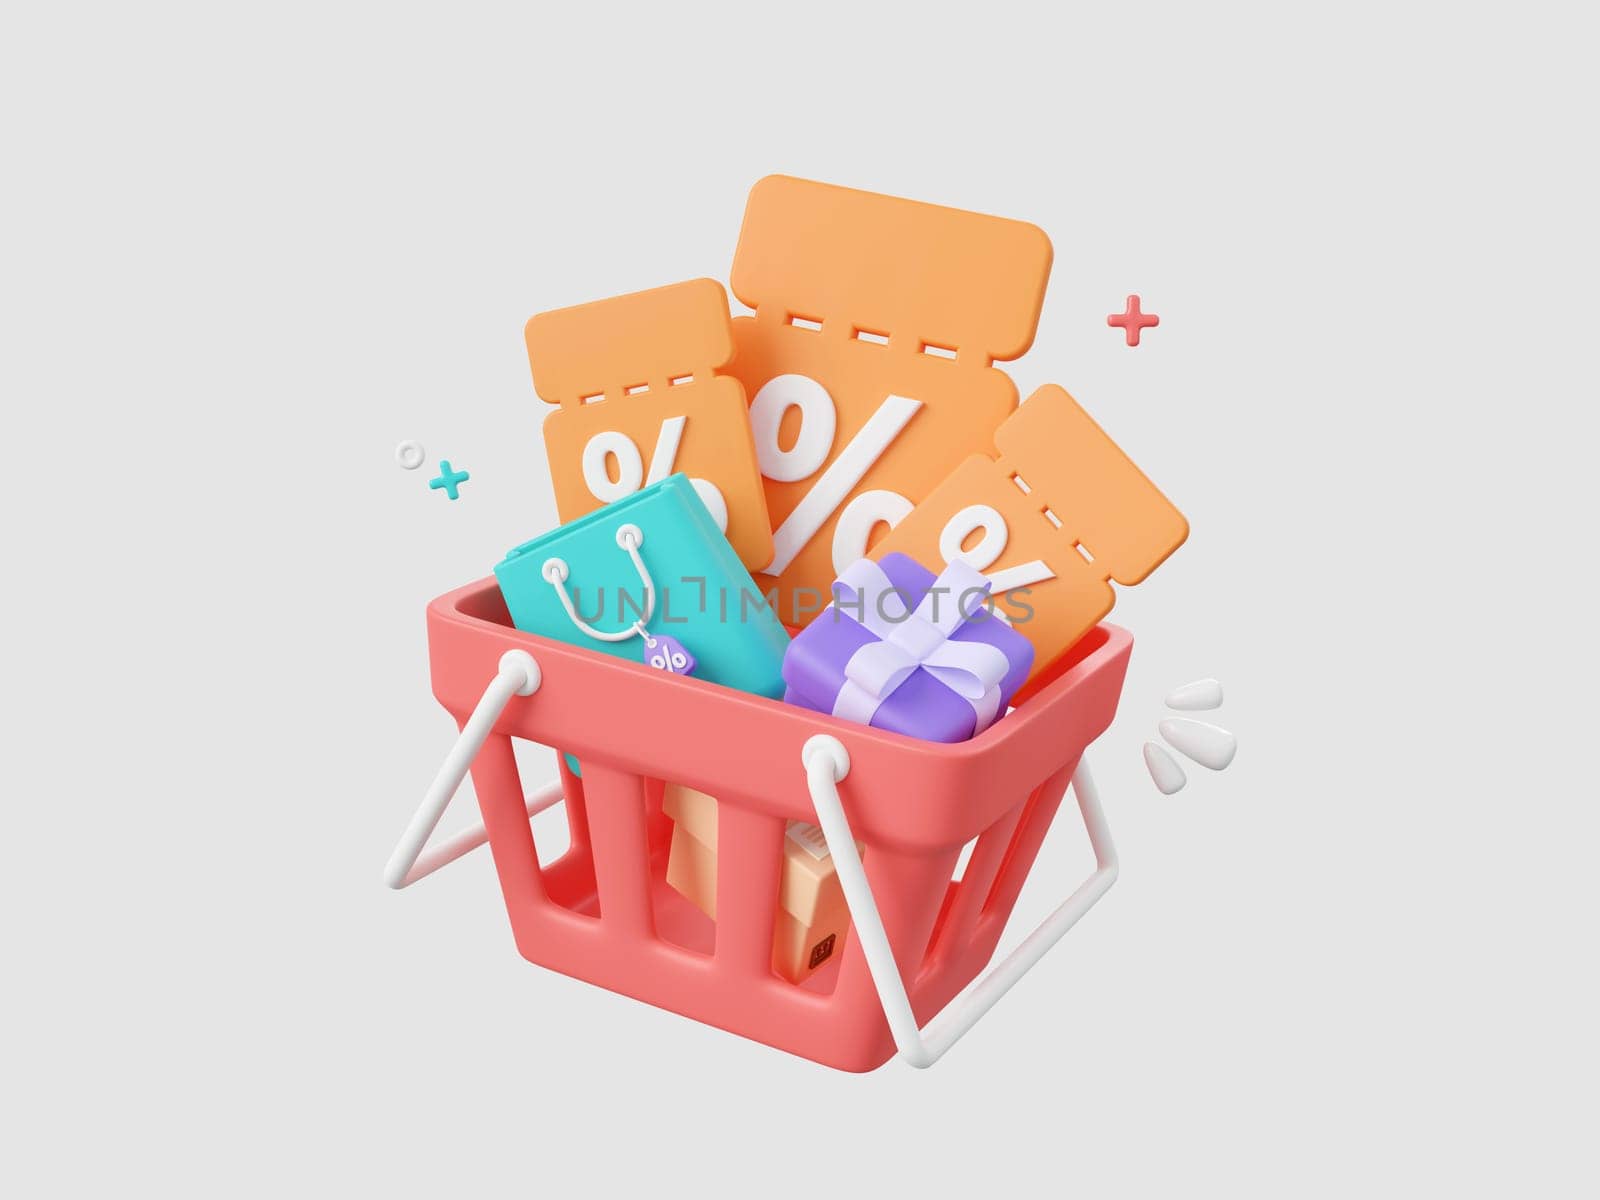 3d cartoon design illustration of Discount code with shopping bag, parcel box and gift box in shopping basket, Advertising marketing promotion concept.